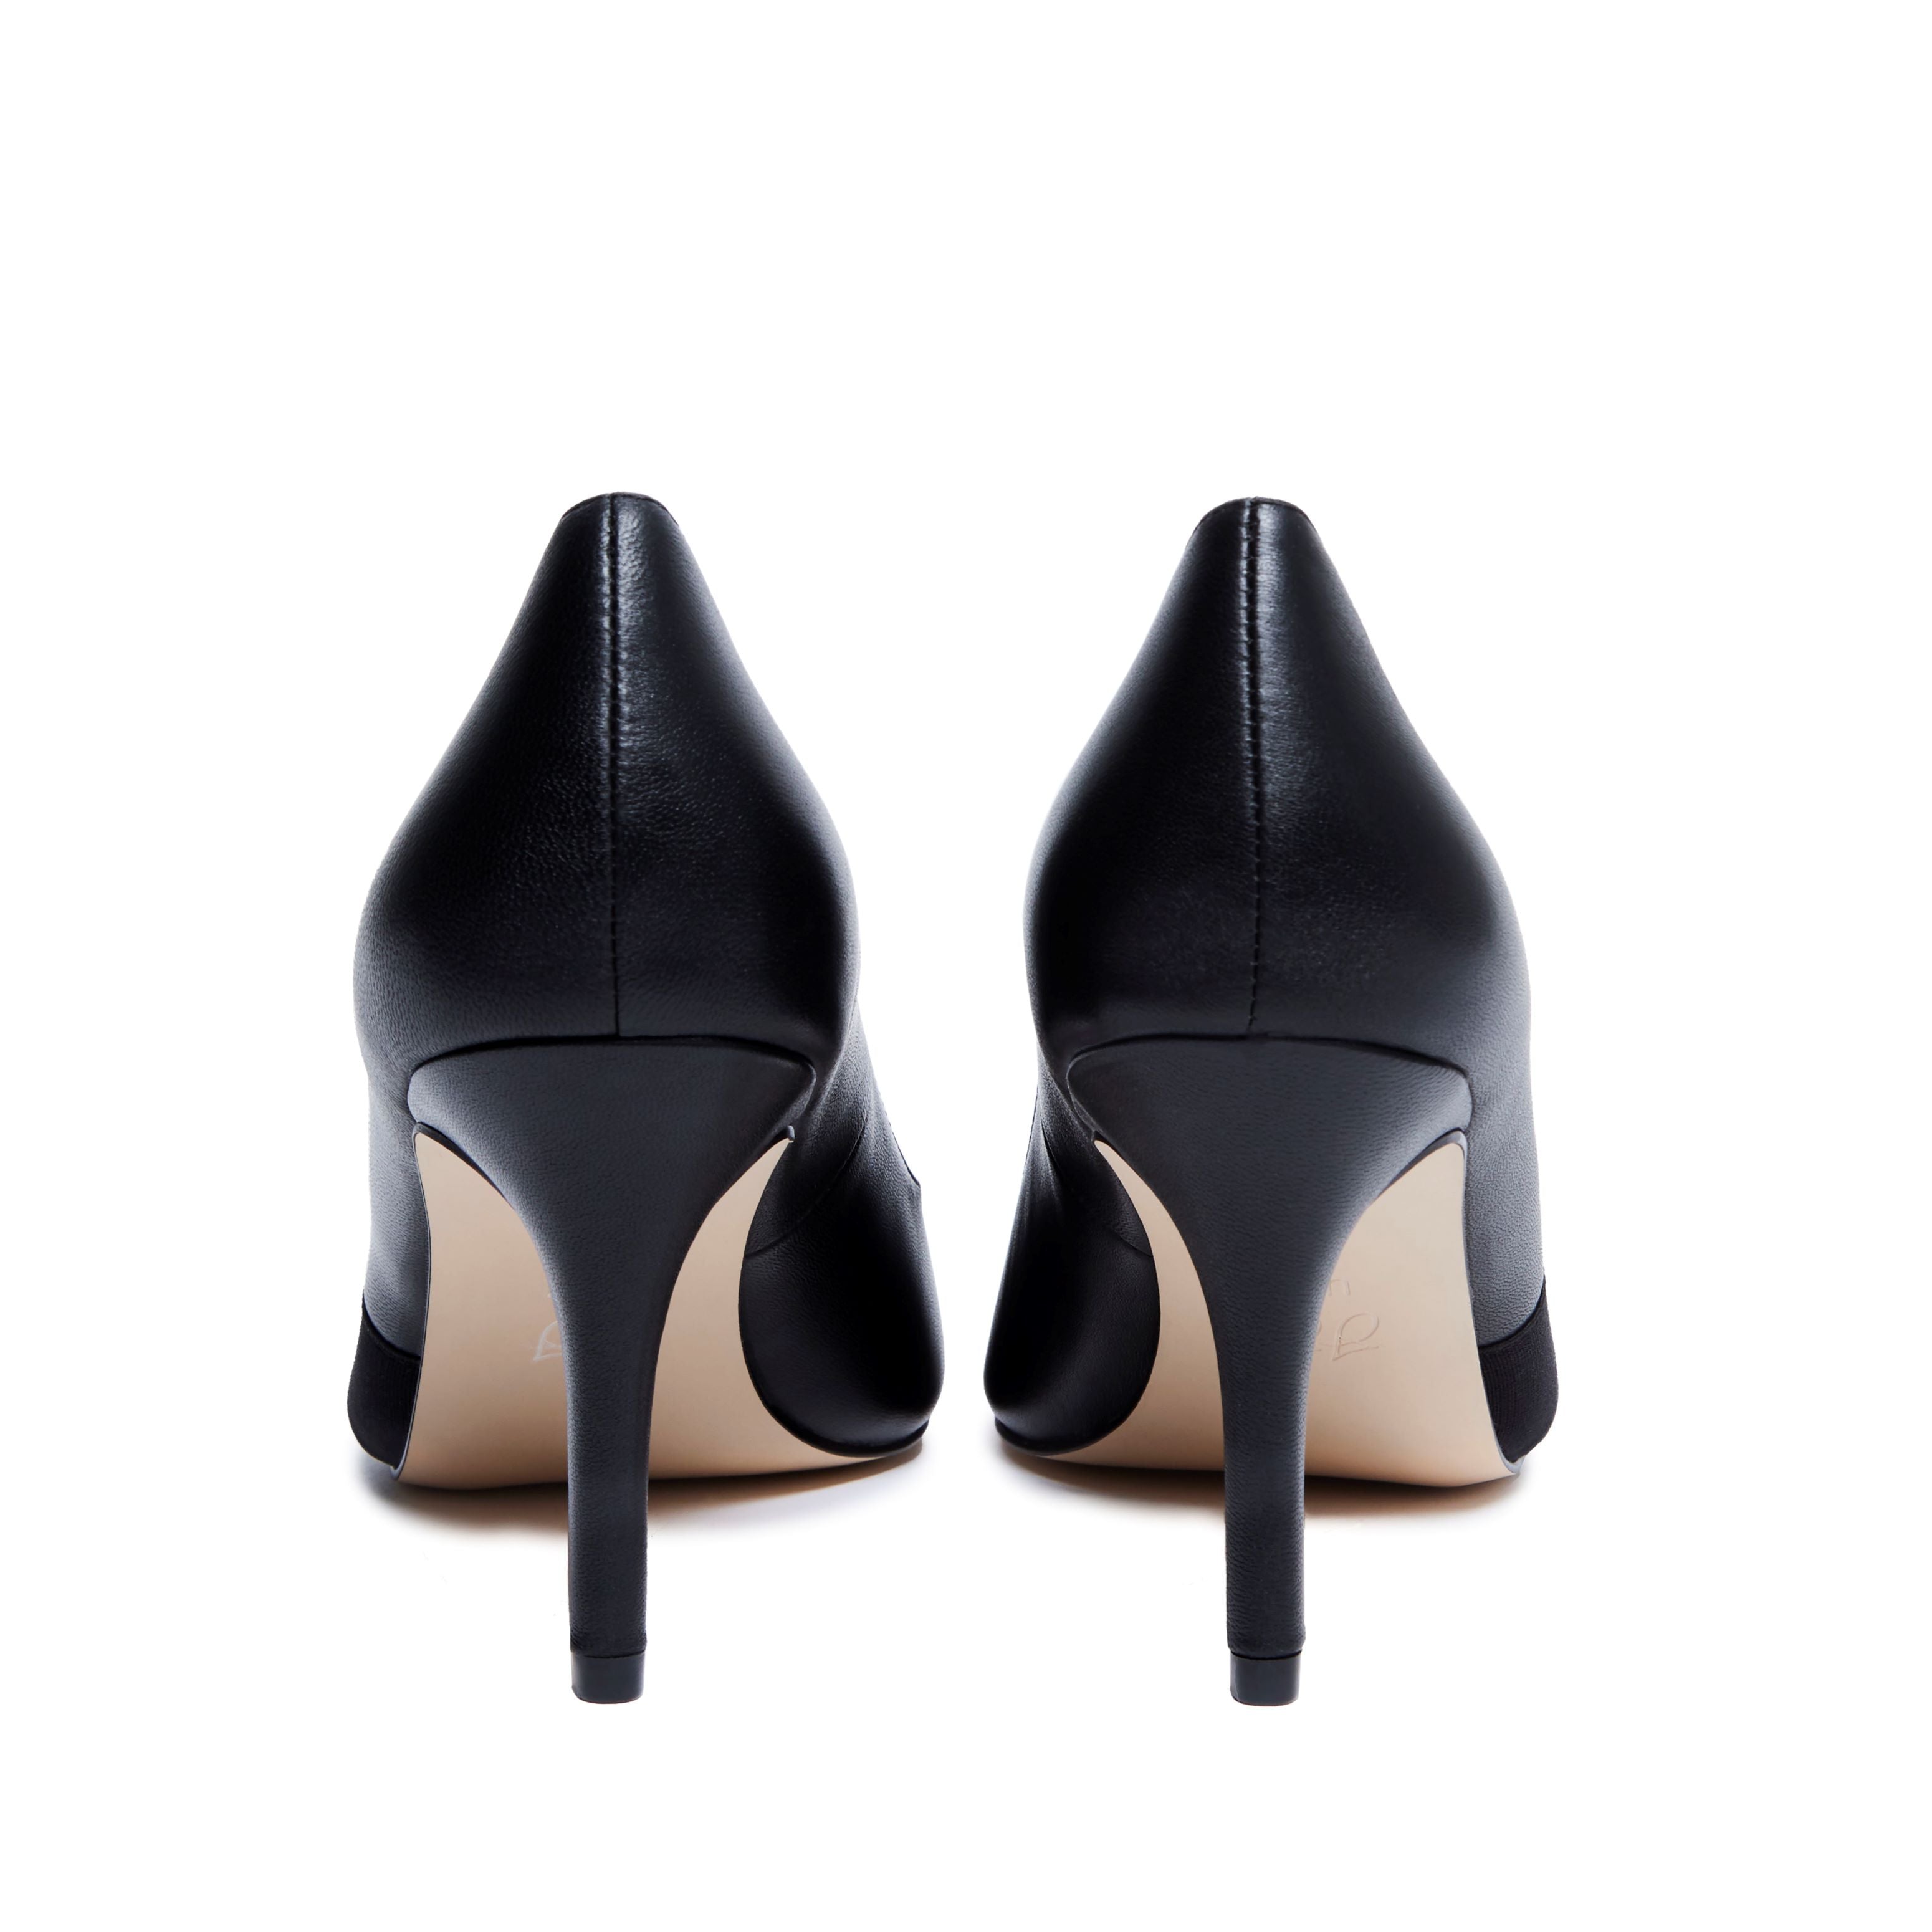 Heels You Shouldn't Buy Because They Hurt! — The Most Comfortable Heels